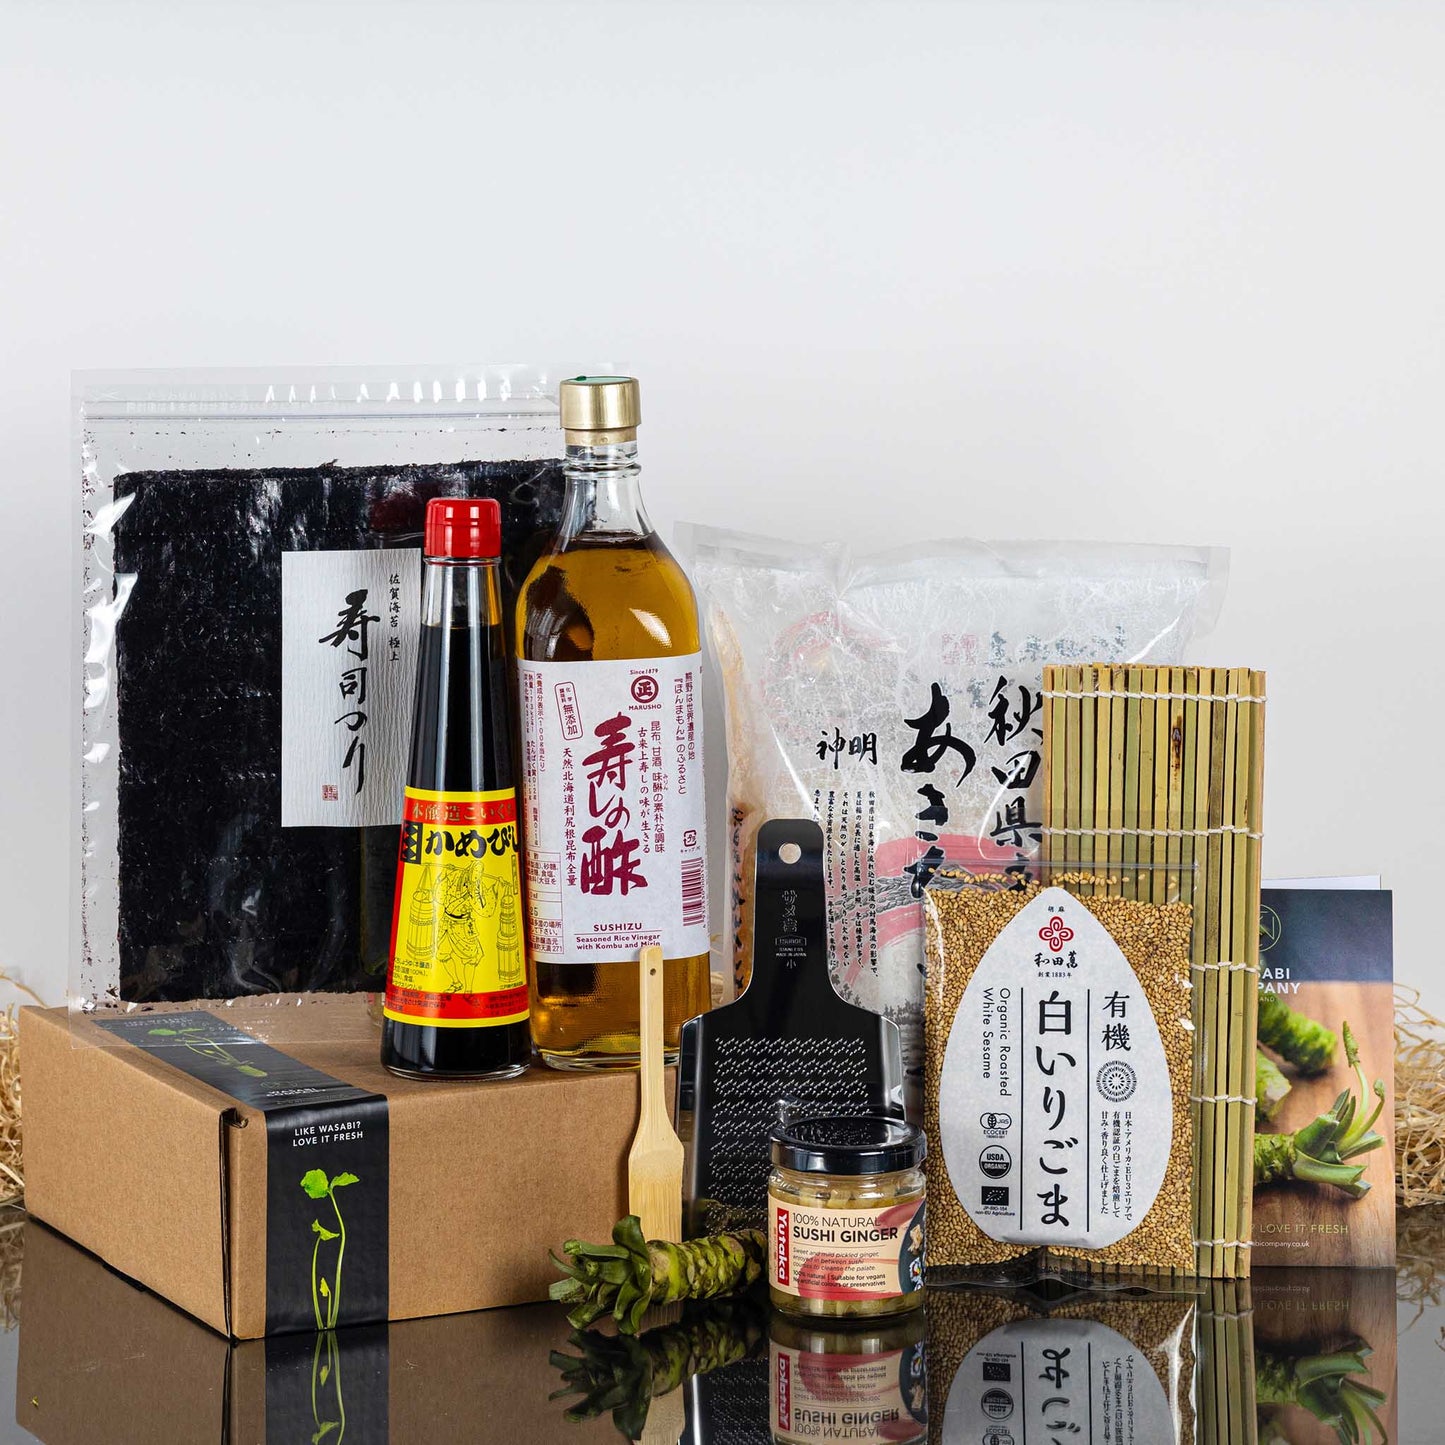 Sushi Ingredients, Kits and Equipment